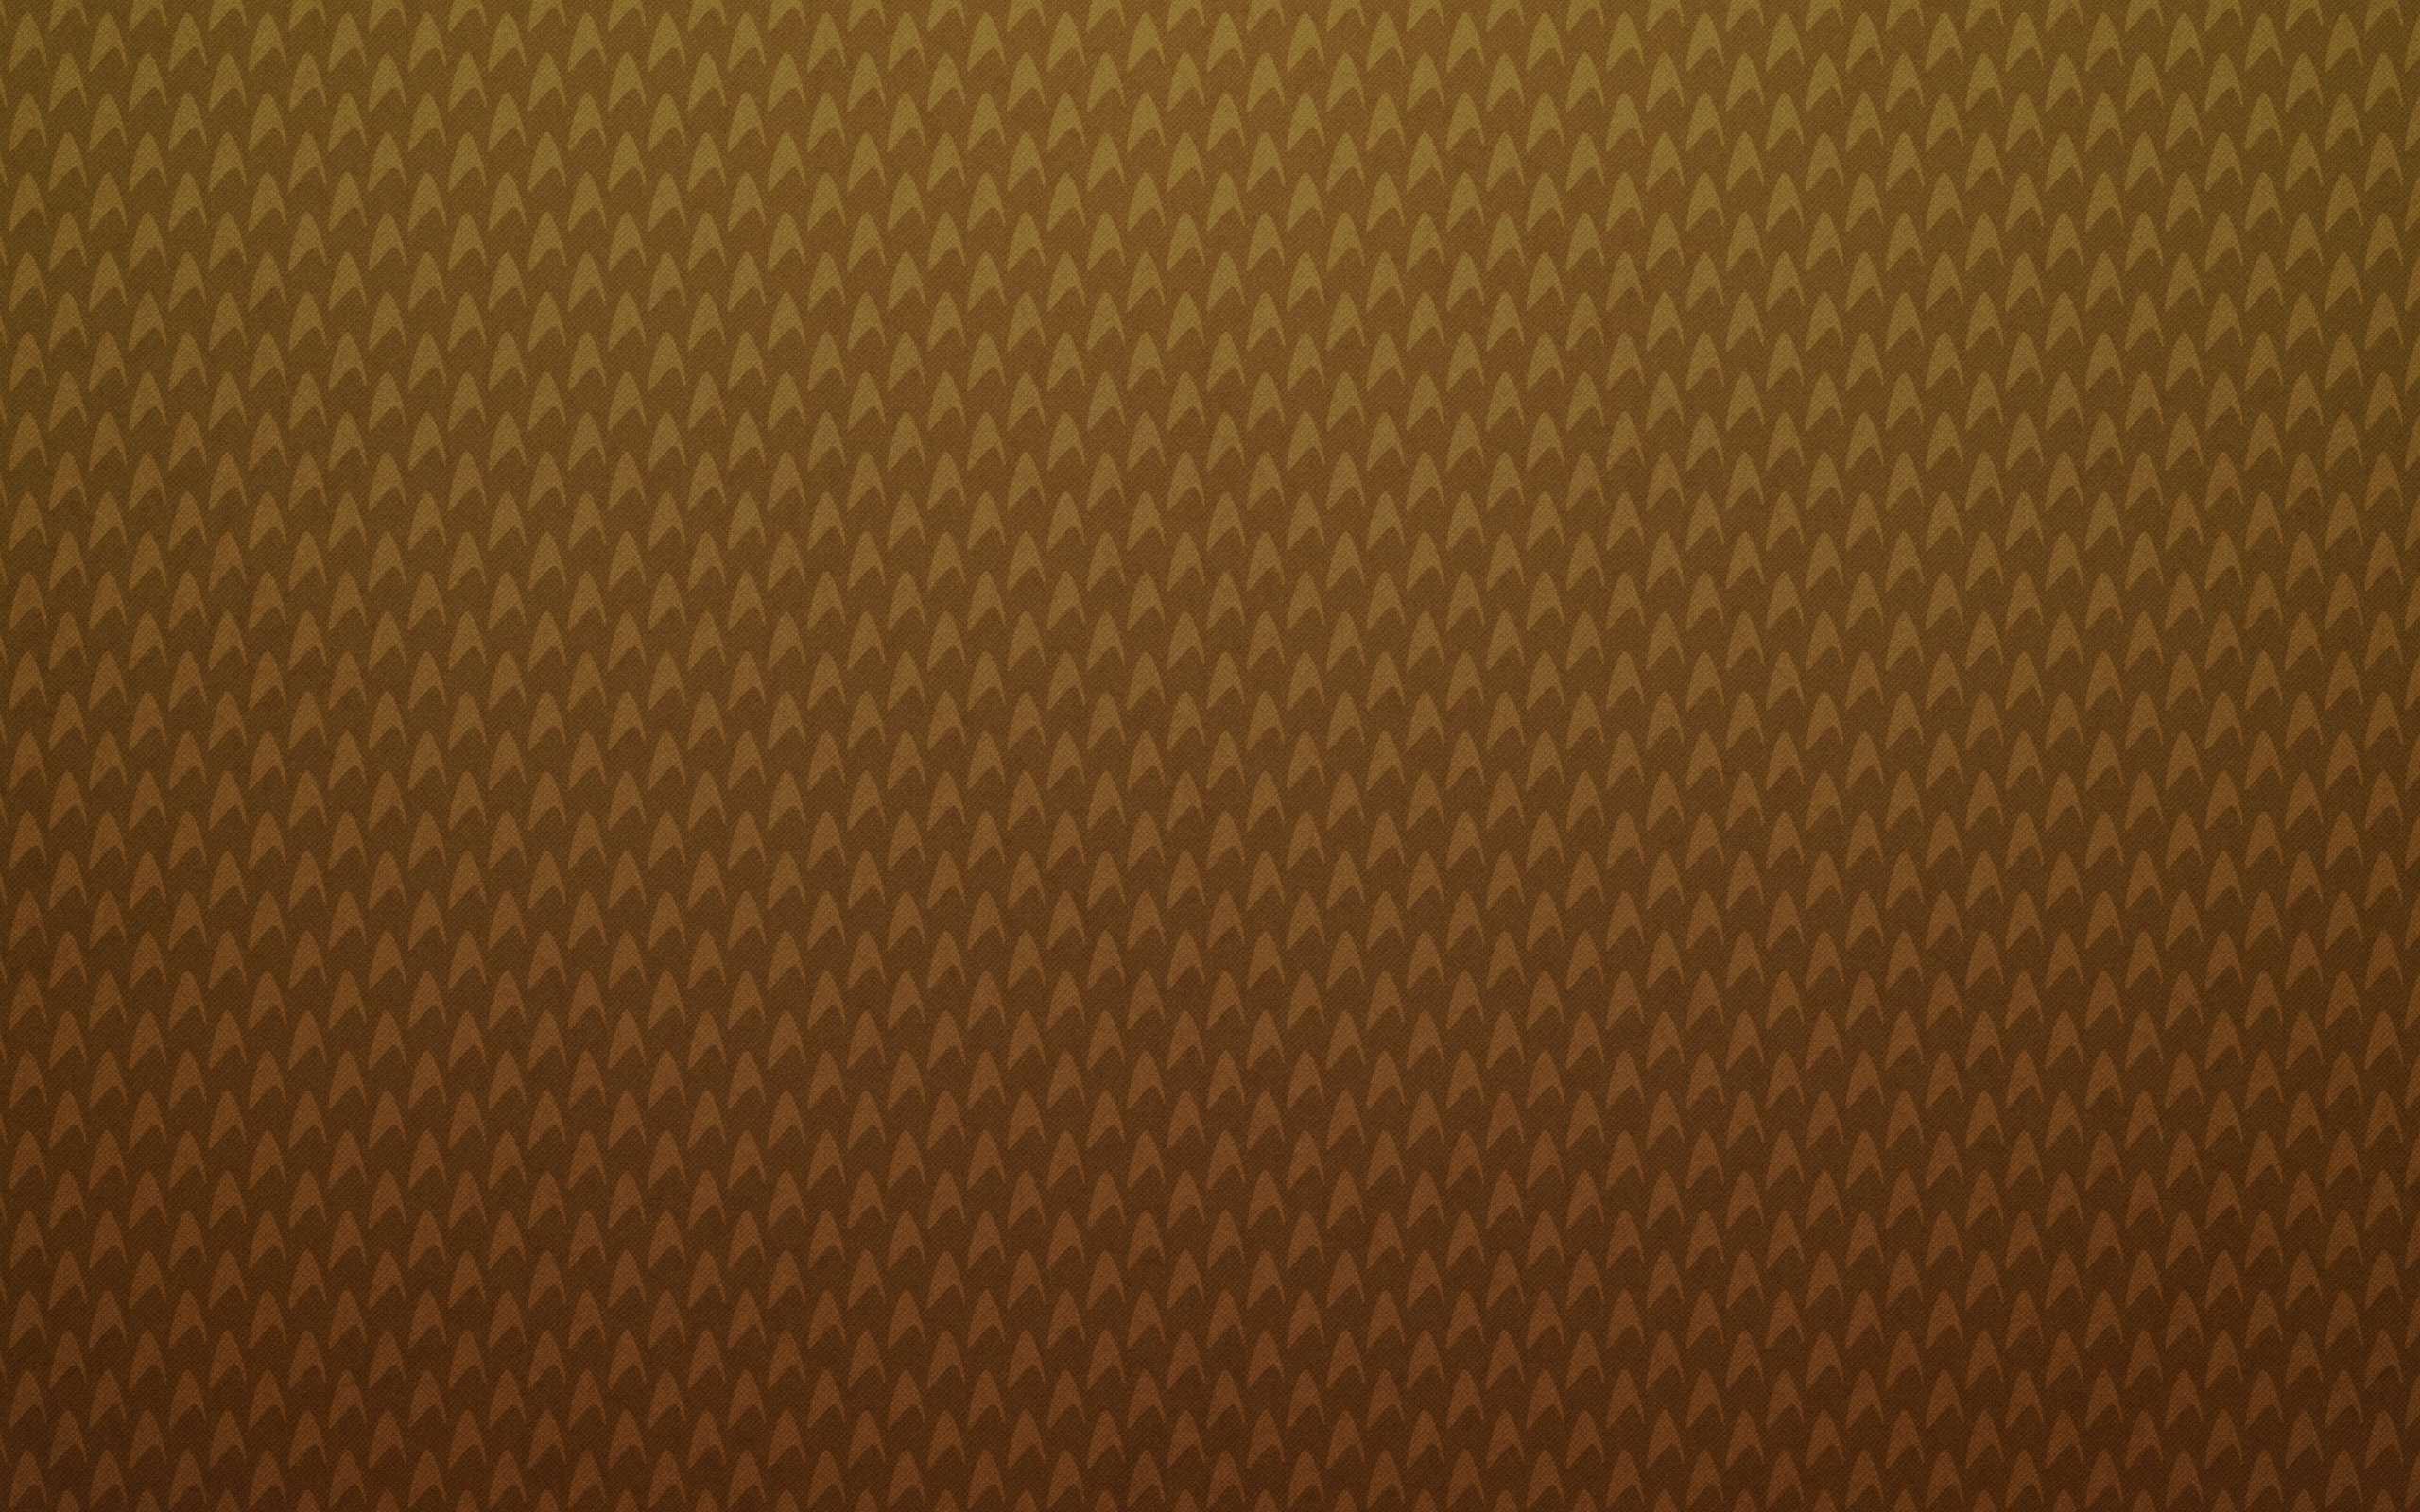 2560x1600 Textures Wallpapers in Best  px Resolutions